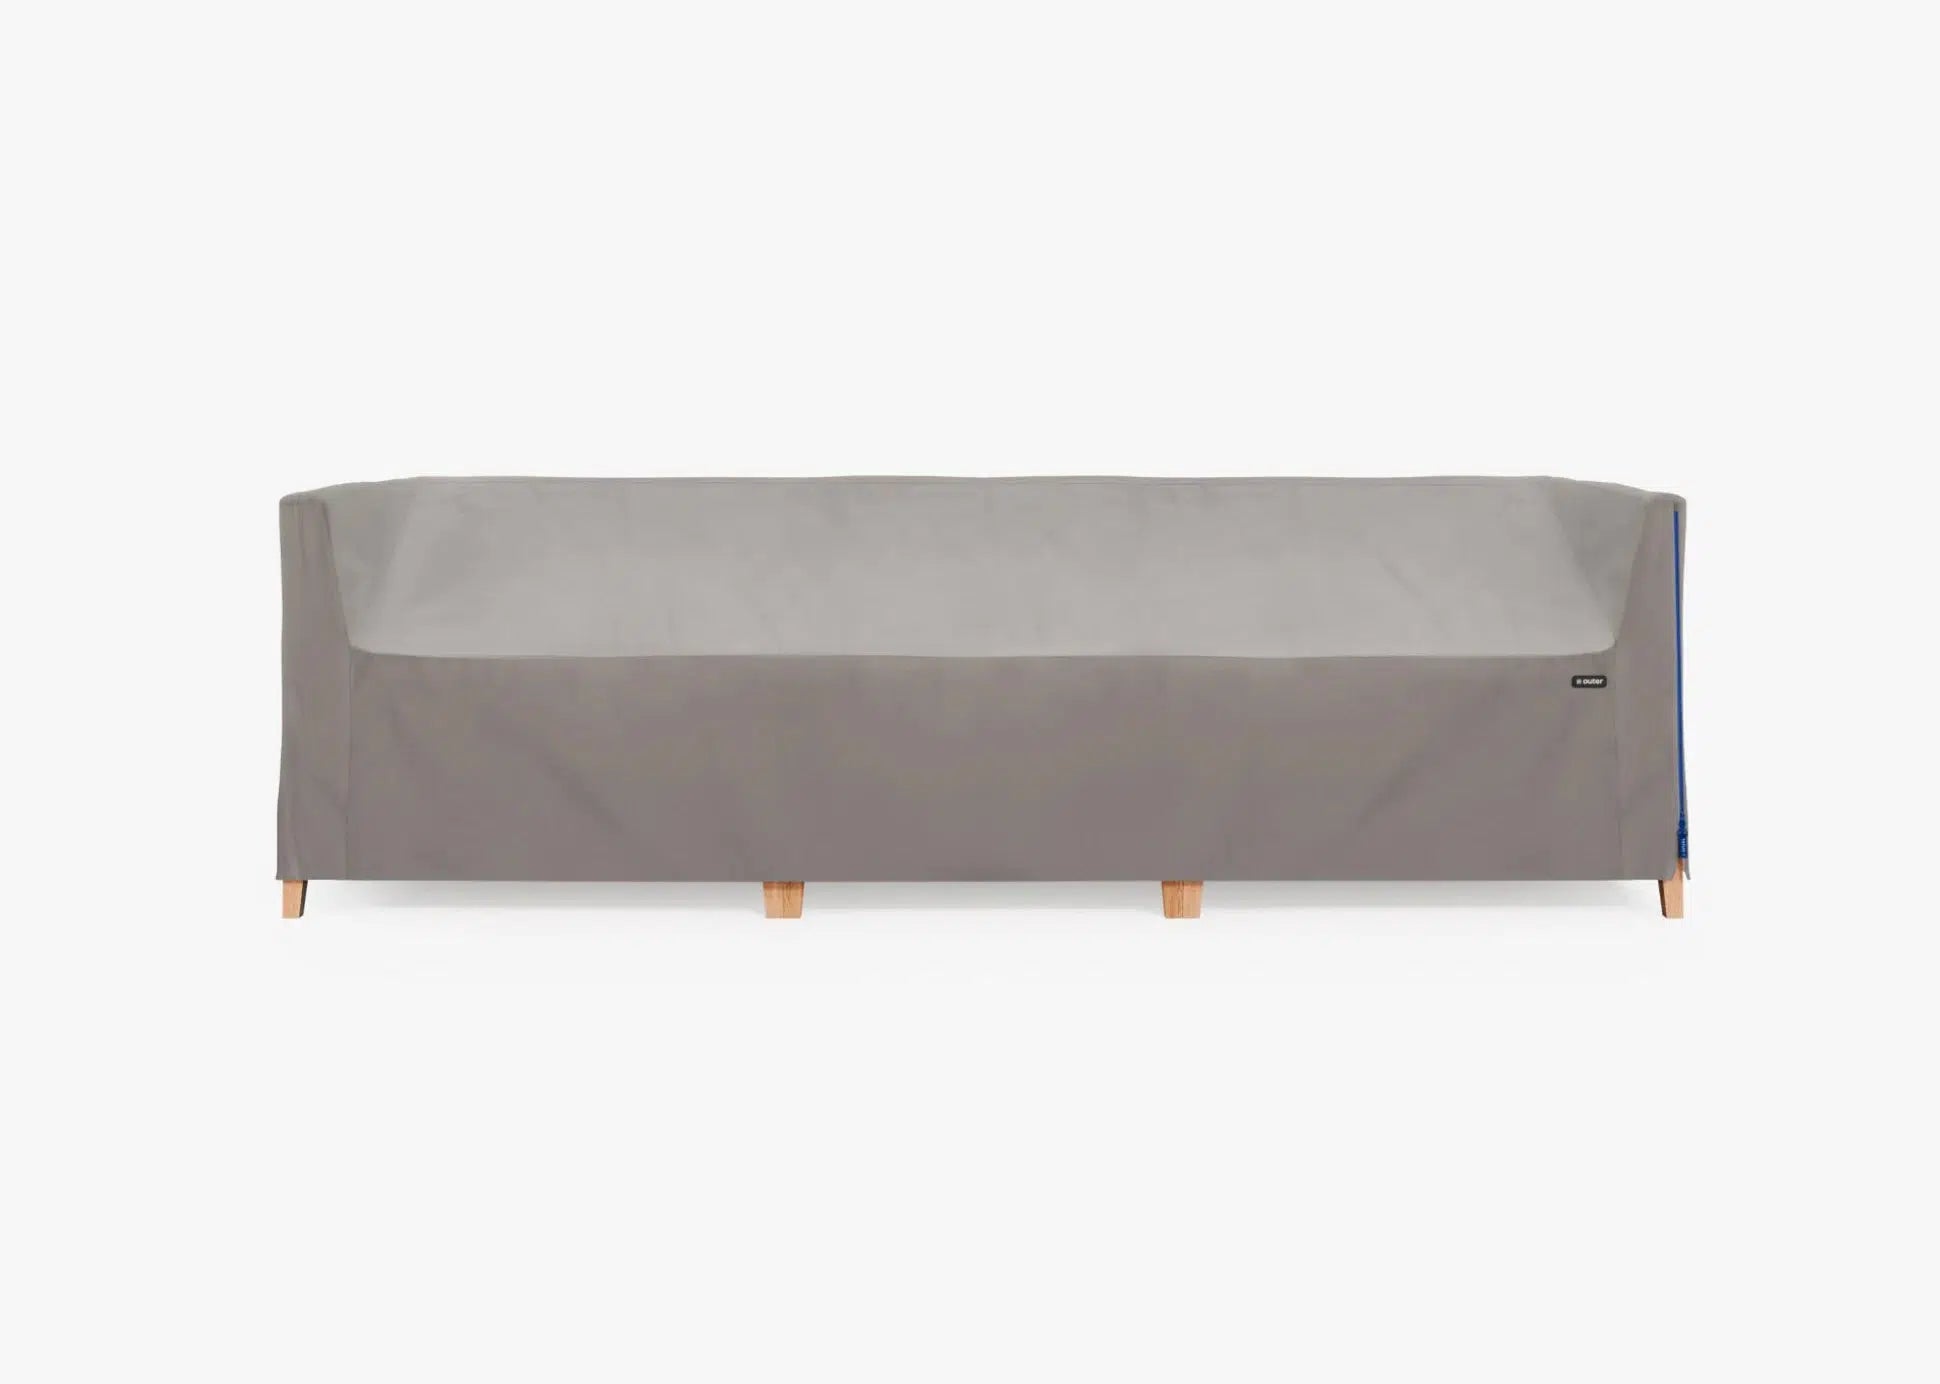 Live Outer Cover for Teak 3-Seat Sofa